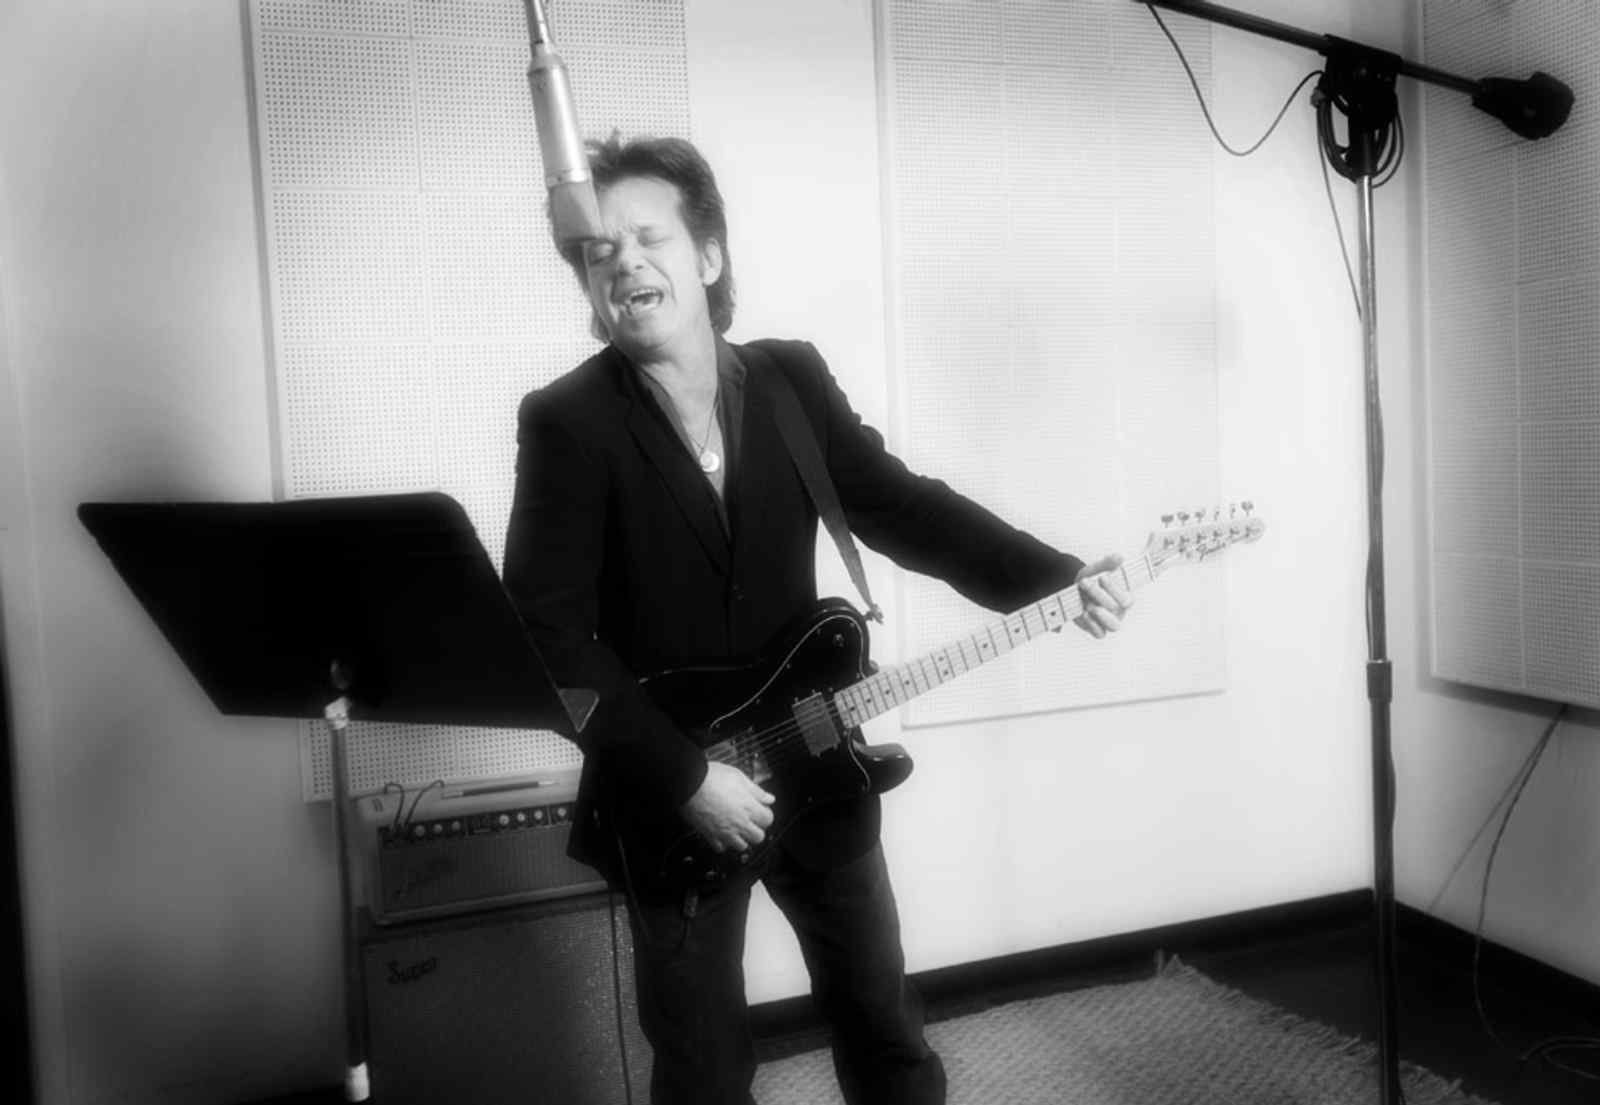 Associated Press: Review: Mellencamp Album Reflects On Life And Wasted Time